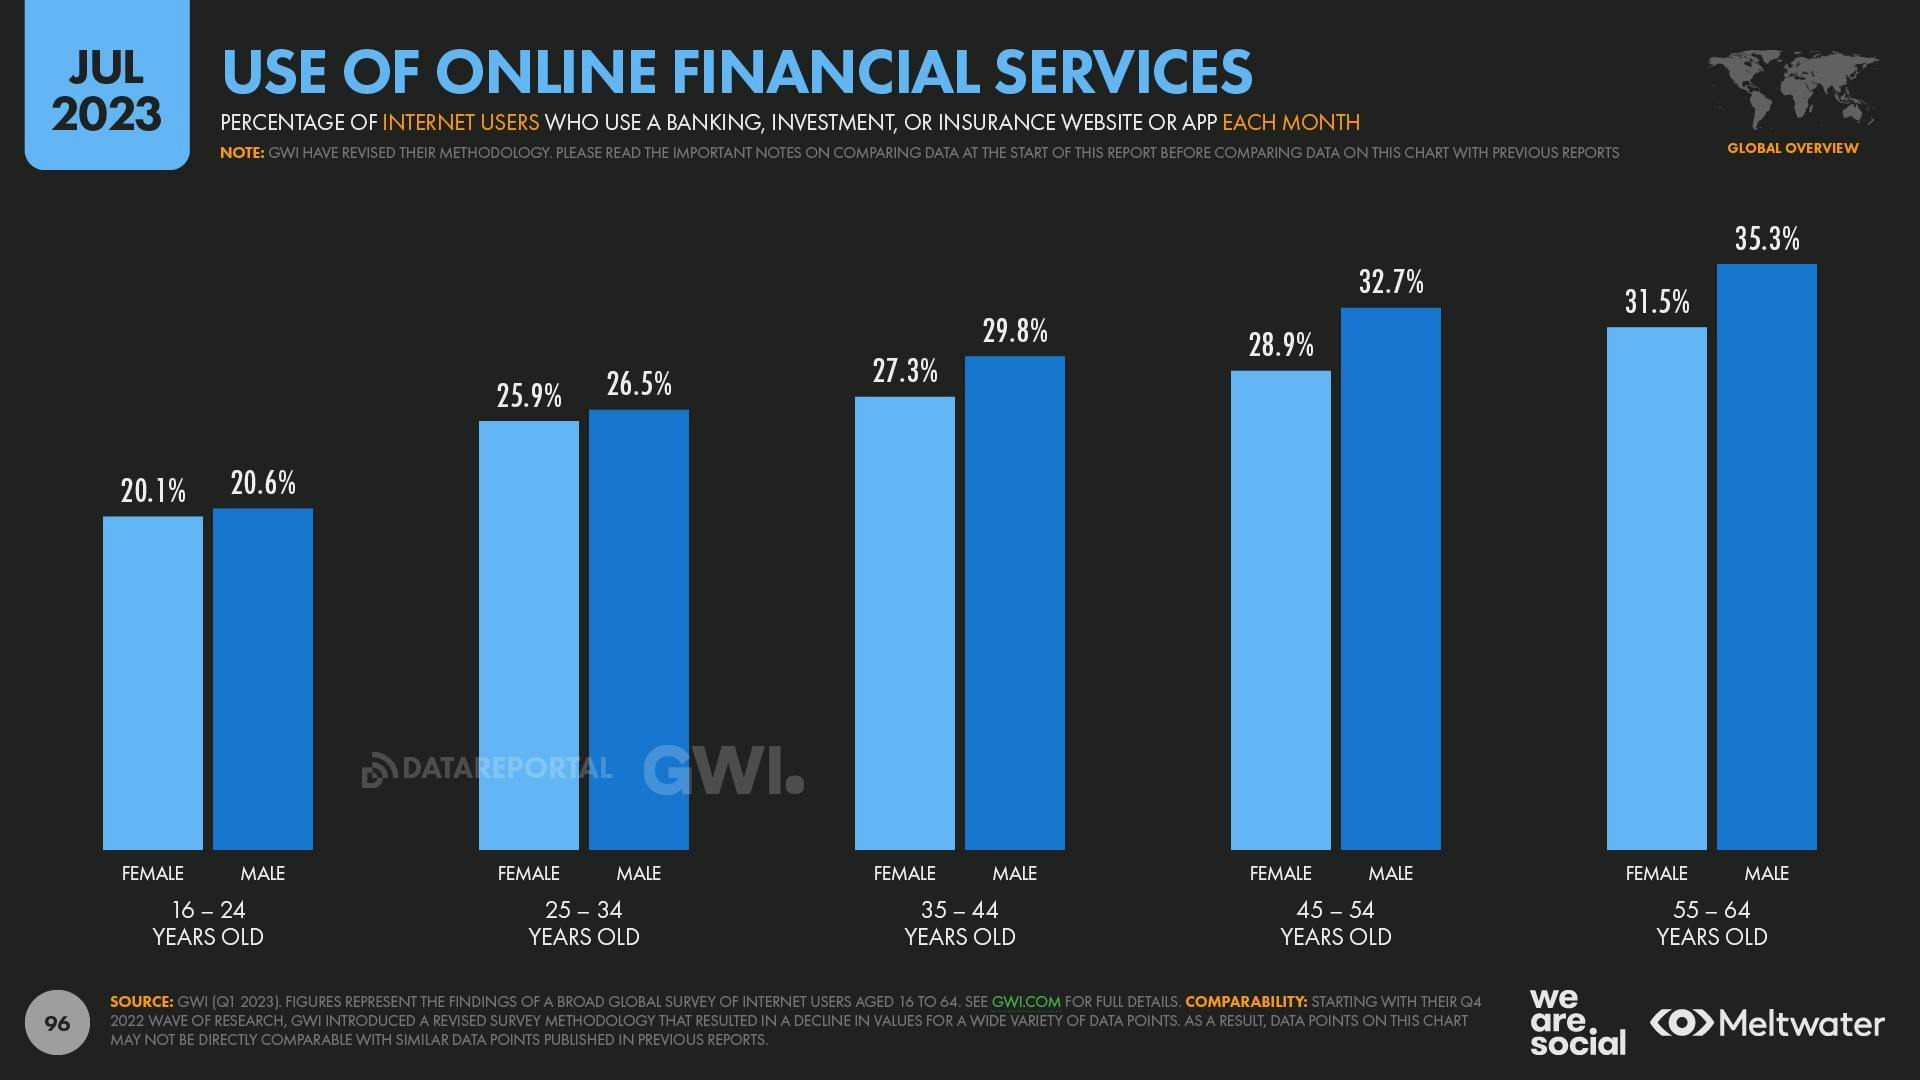 Use of online financial services by gender and age group